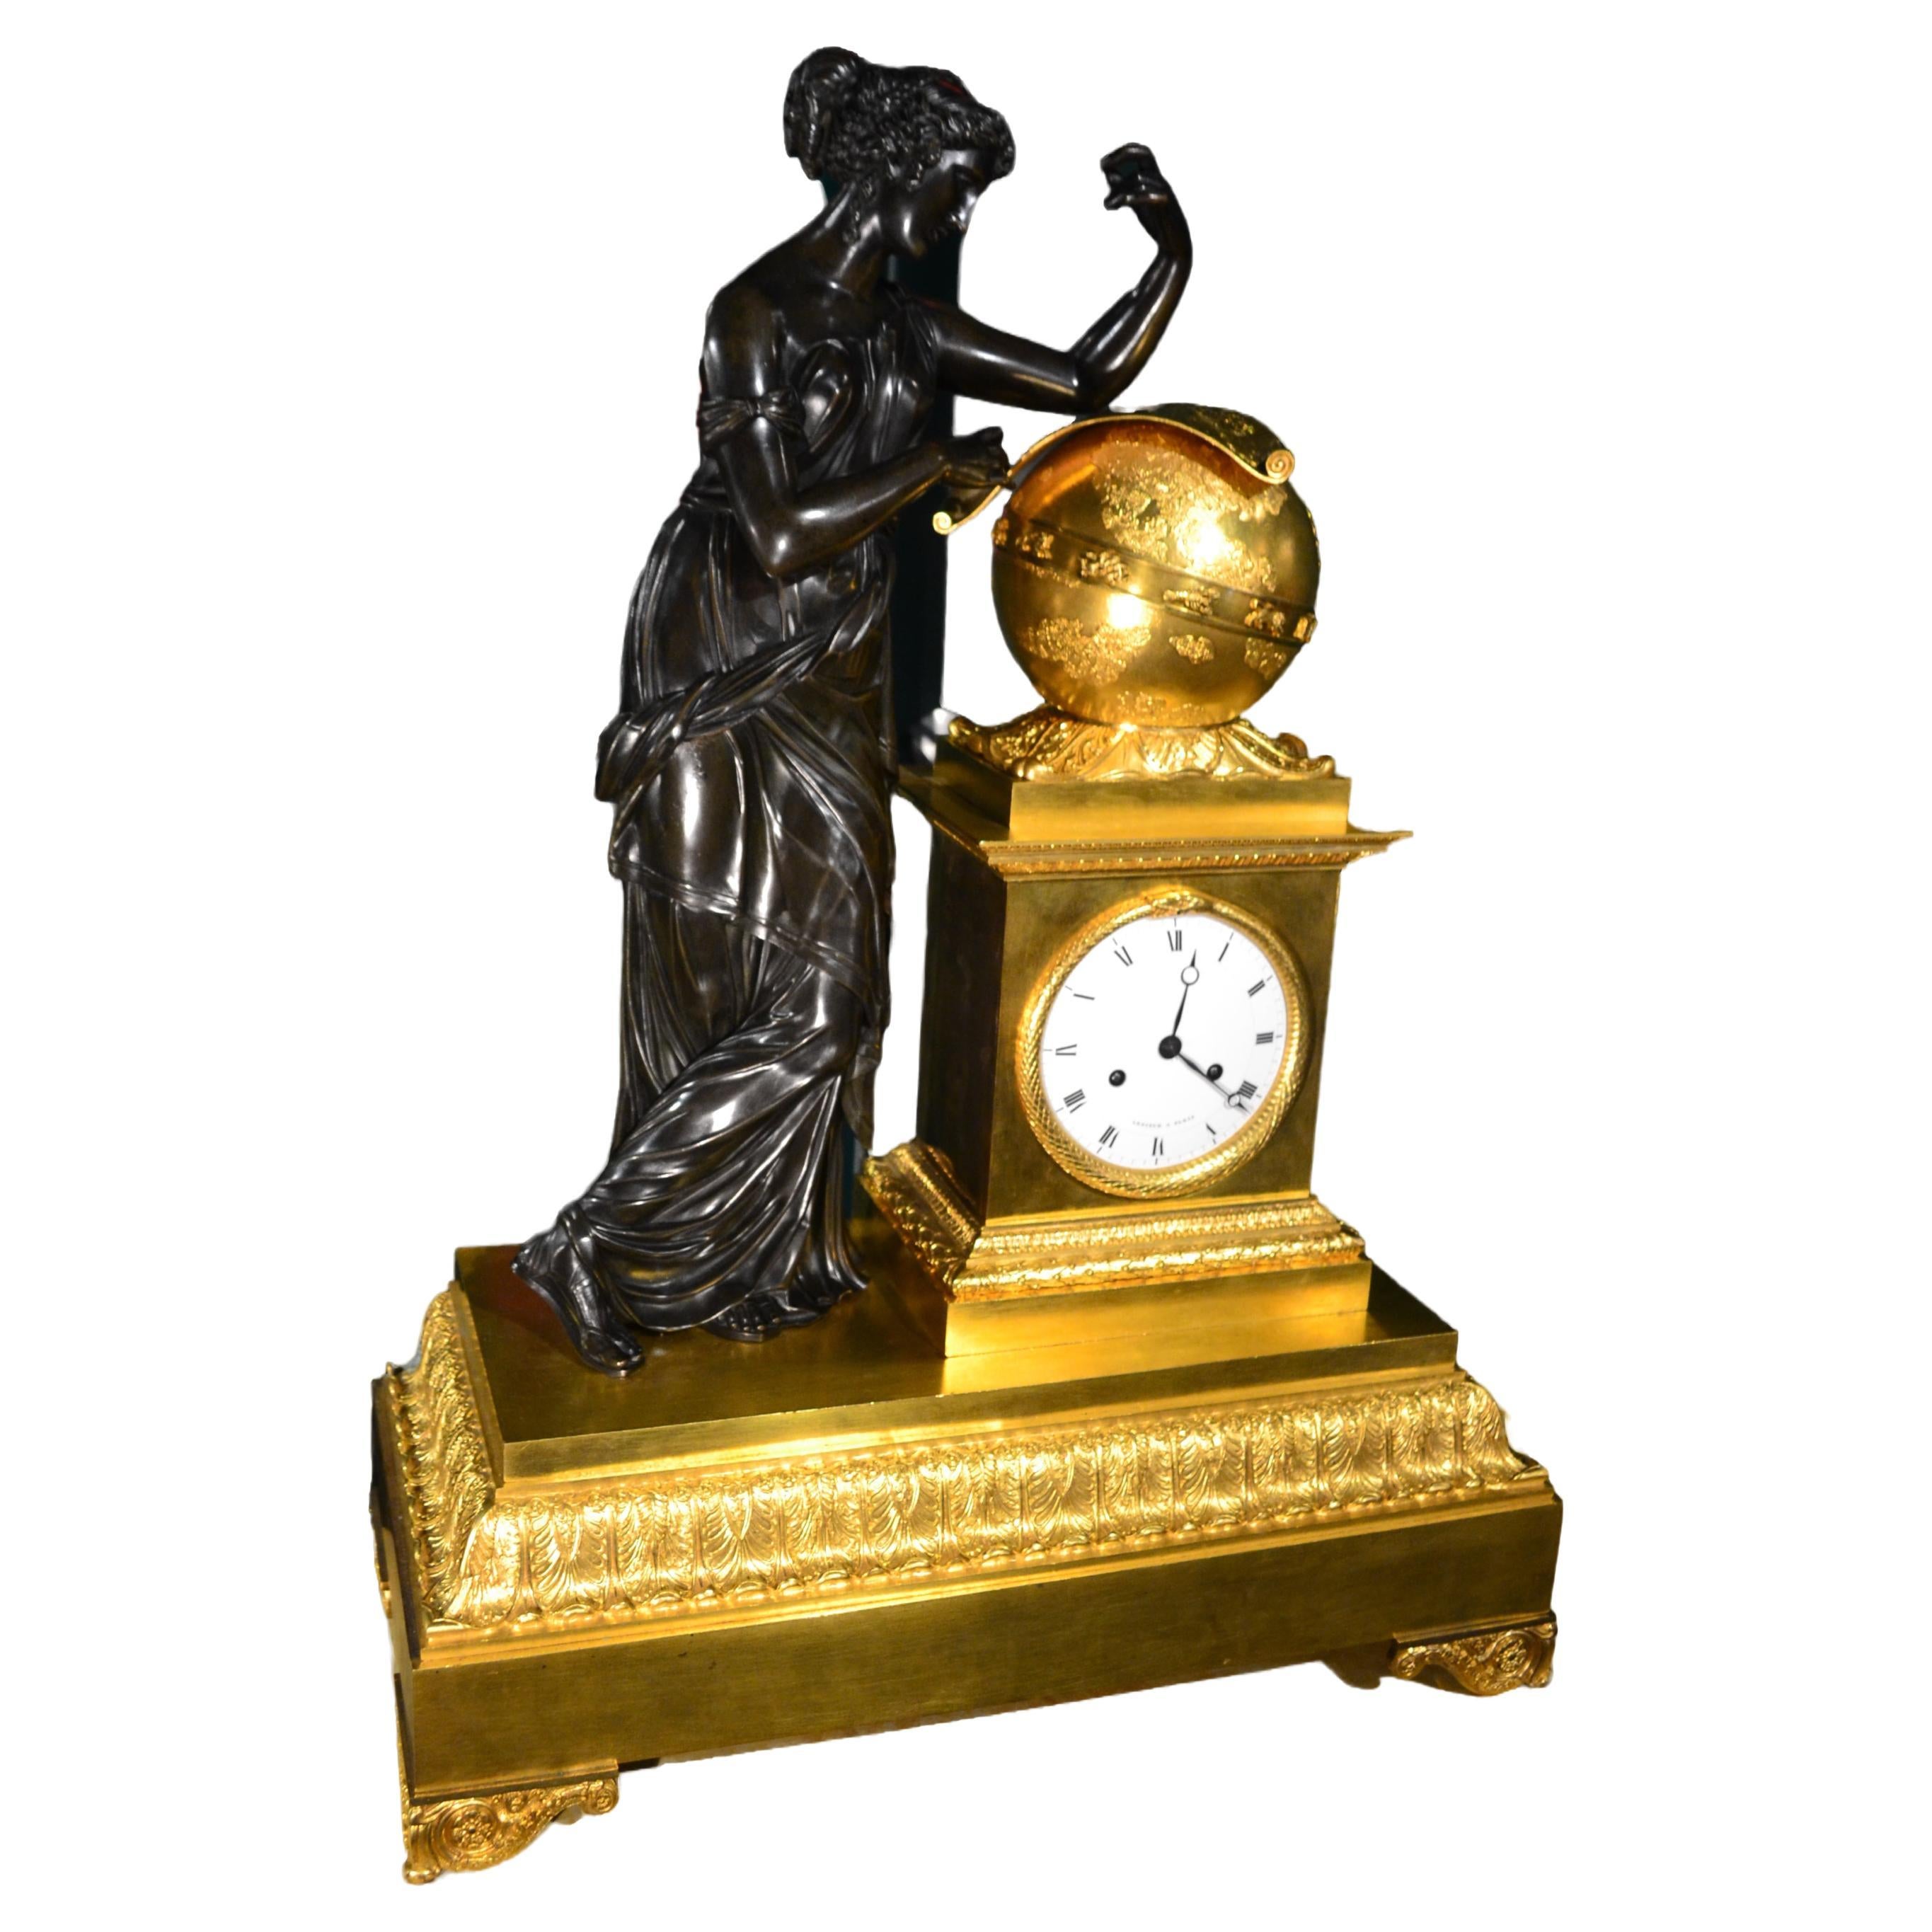 
A magnificent large gilded and patinated bronze period French Empire mantle clock depicting Urania the Greek Muse of Astronomy standing on a stepped rectangular gilded bronze base her left elbow resting on a large gilded globe of the heavens with a